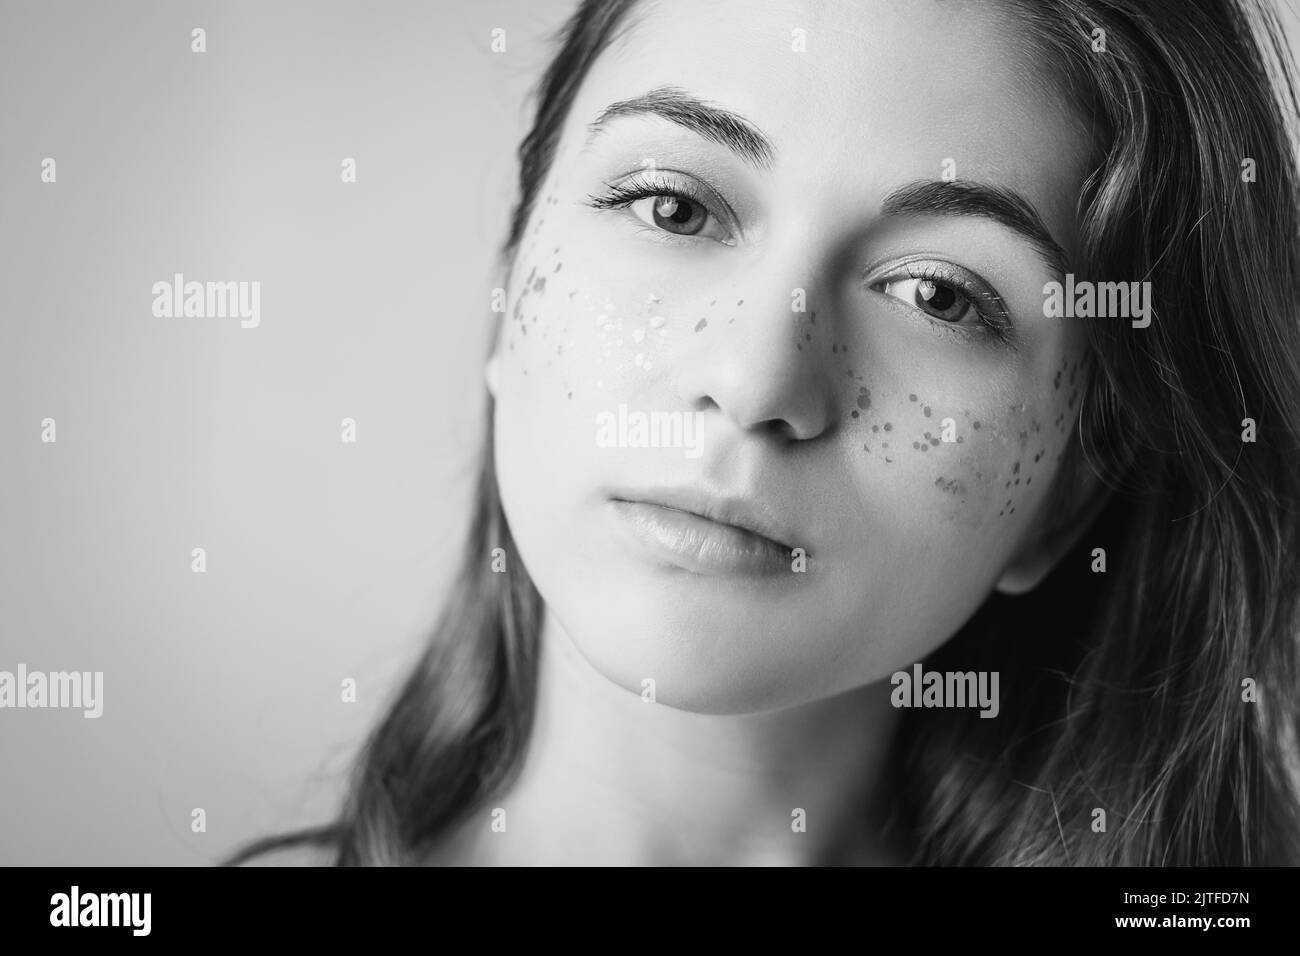 young woman beauty fashion glitter freckles makeup Stock Photo